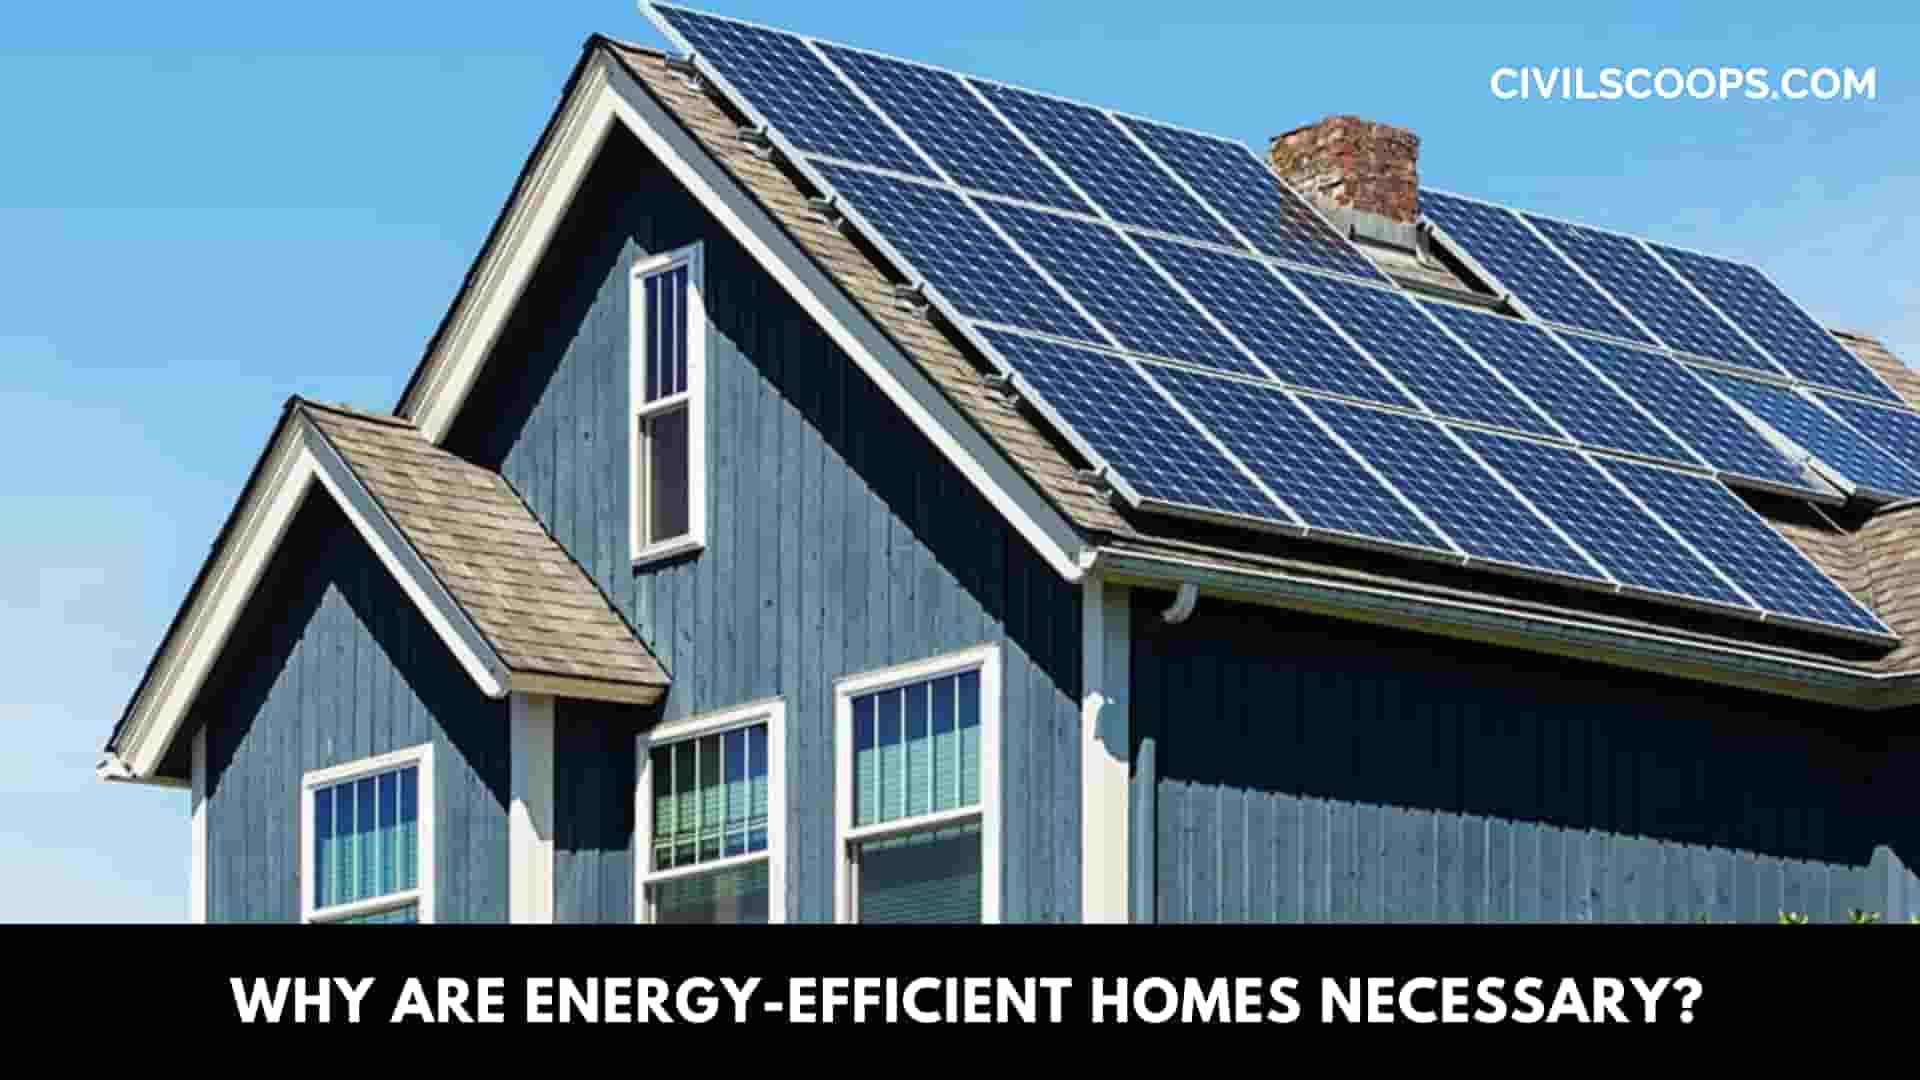 Why Are Energy-Efficient Homes Necessary